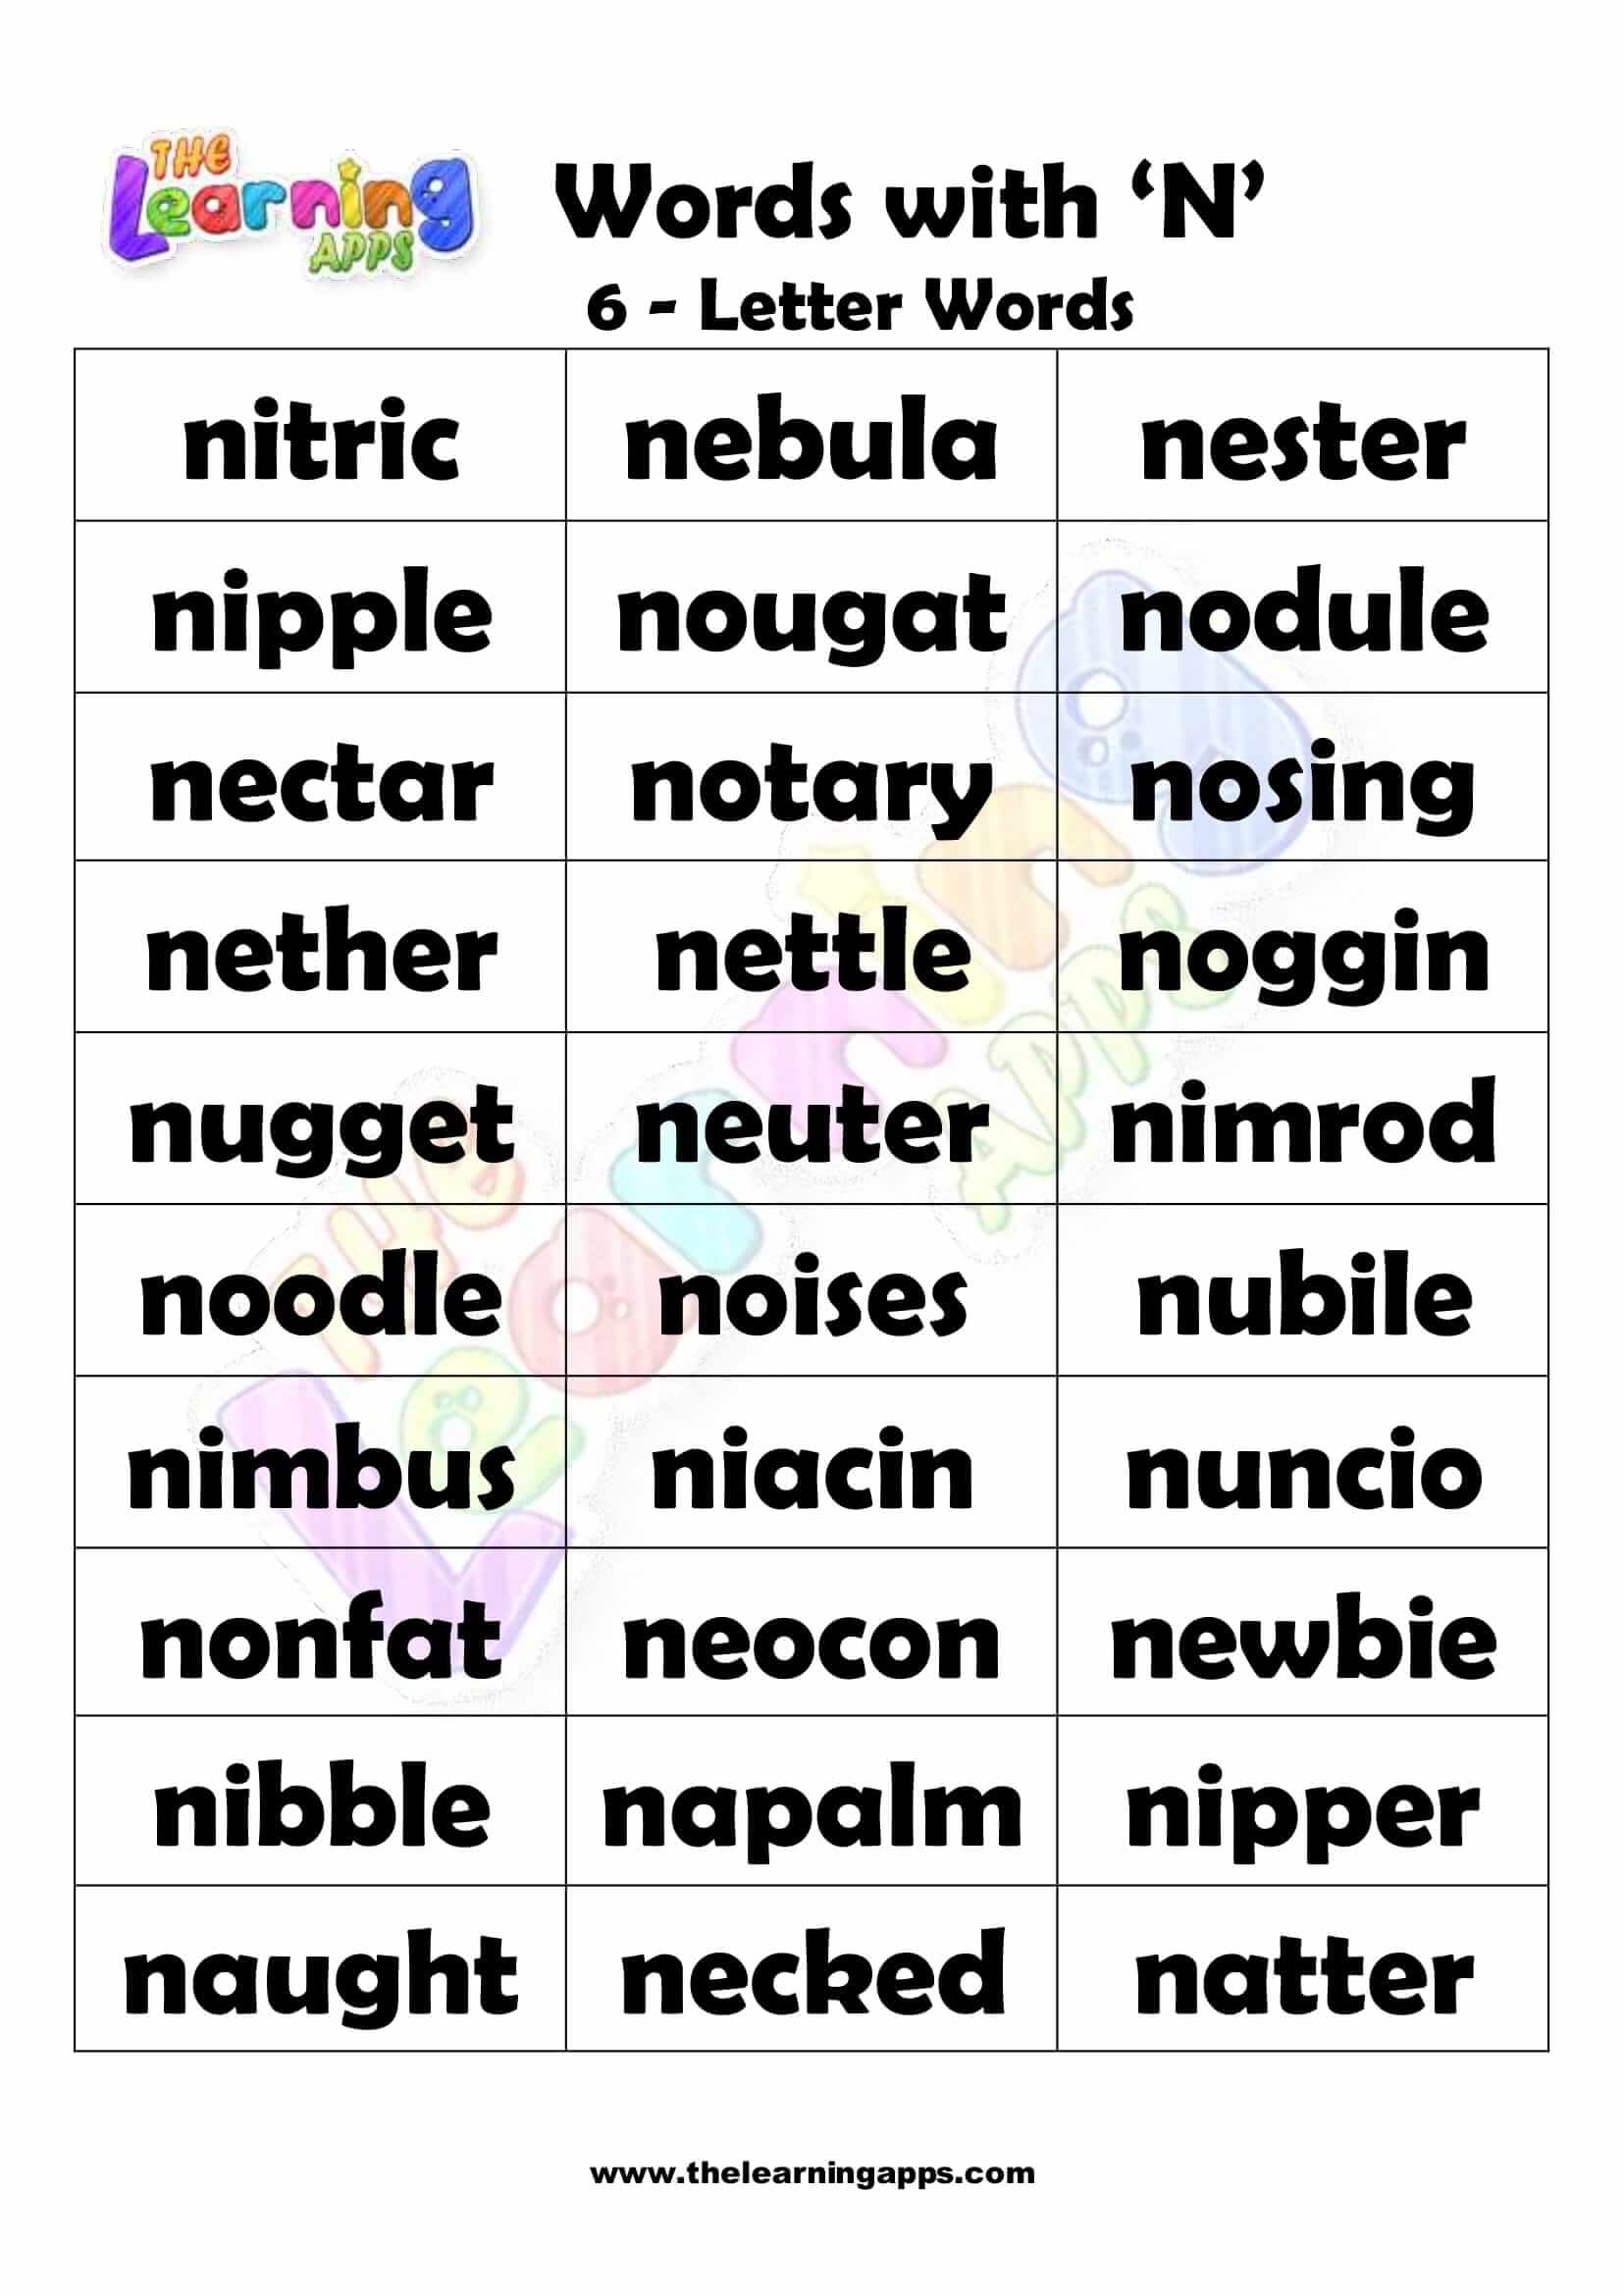 6 LETTER WORD STARTING WITH N-2